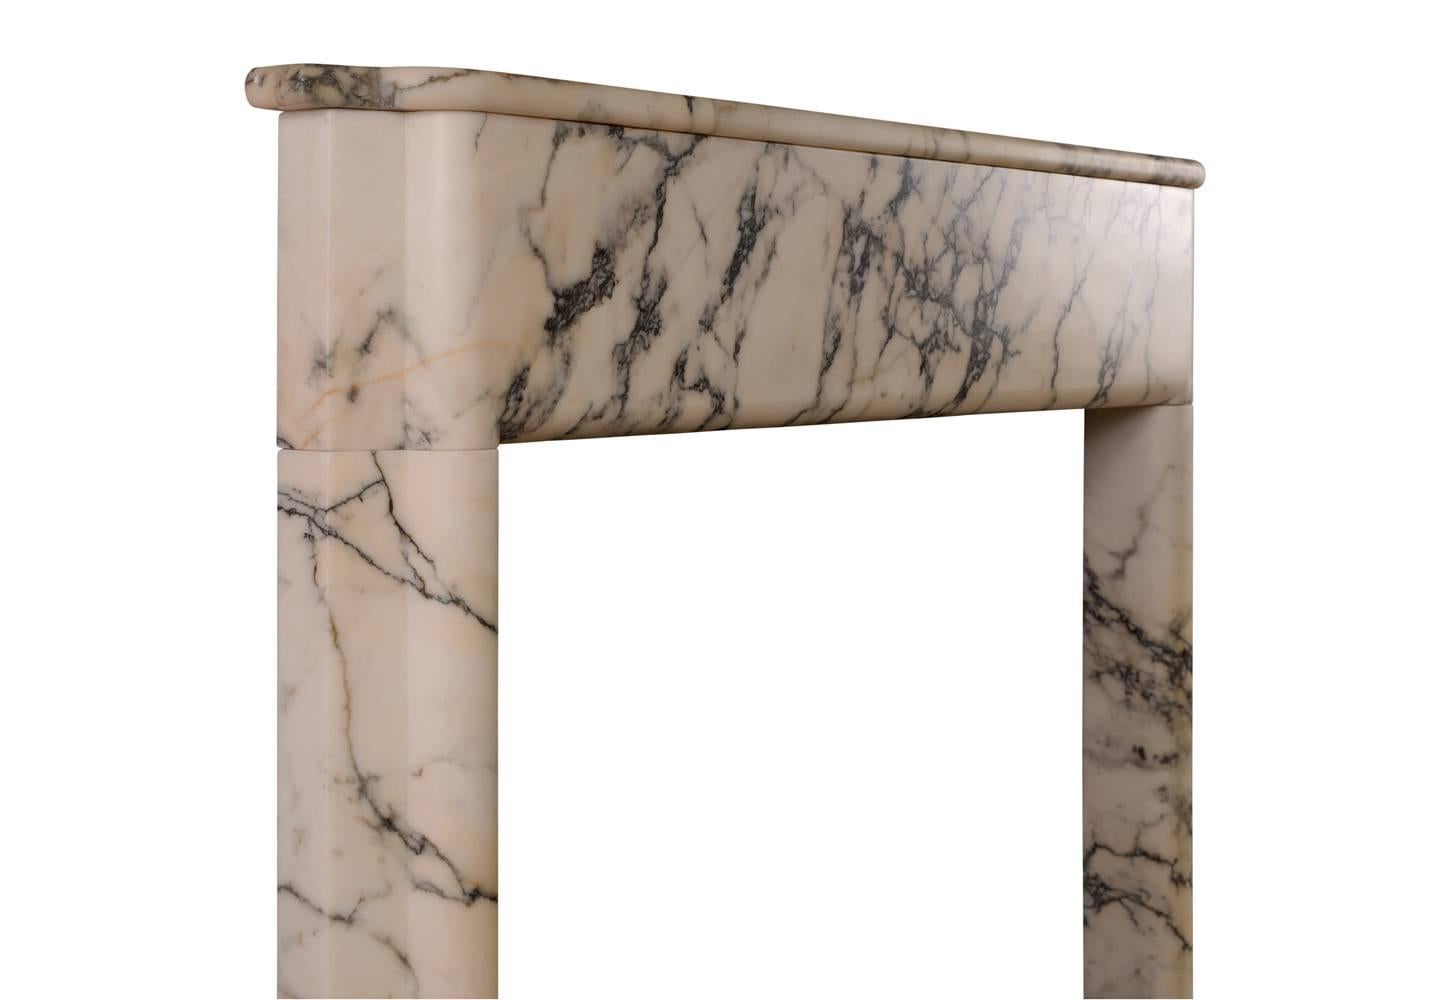 A rarely found English, early 20th century Art Deco fireplace in Italian Pavonazzo marble. The moulded jambs surmounted by plain frieze and shaped shelf above.

Measurements:
Shelf width - 1360 mm / 53 1/2 in.
Overall height - 1310 mm / 51 5/8